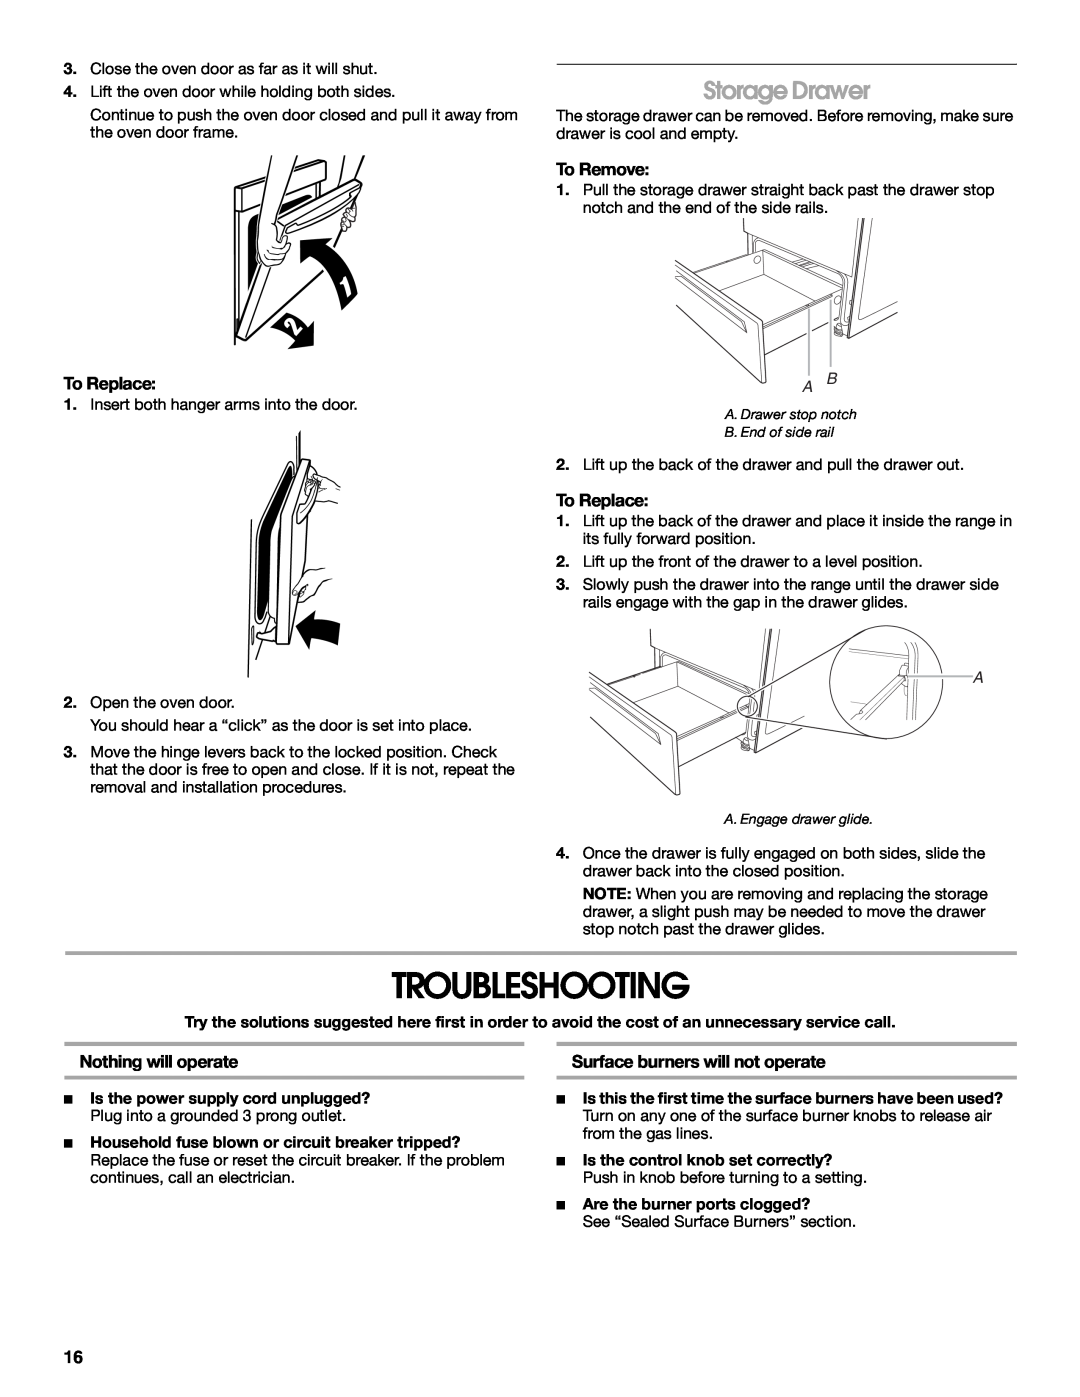 Whirlpool W10017570 manual Troubleshooting, Storage Drawer, To Remove, To Replace, Nothing will operate 